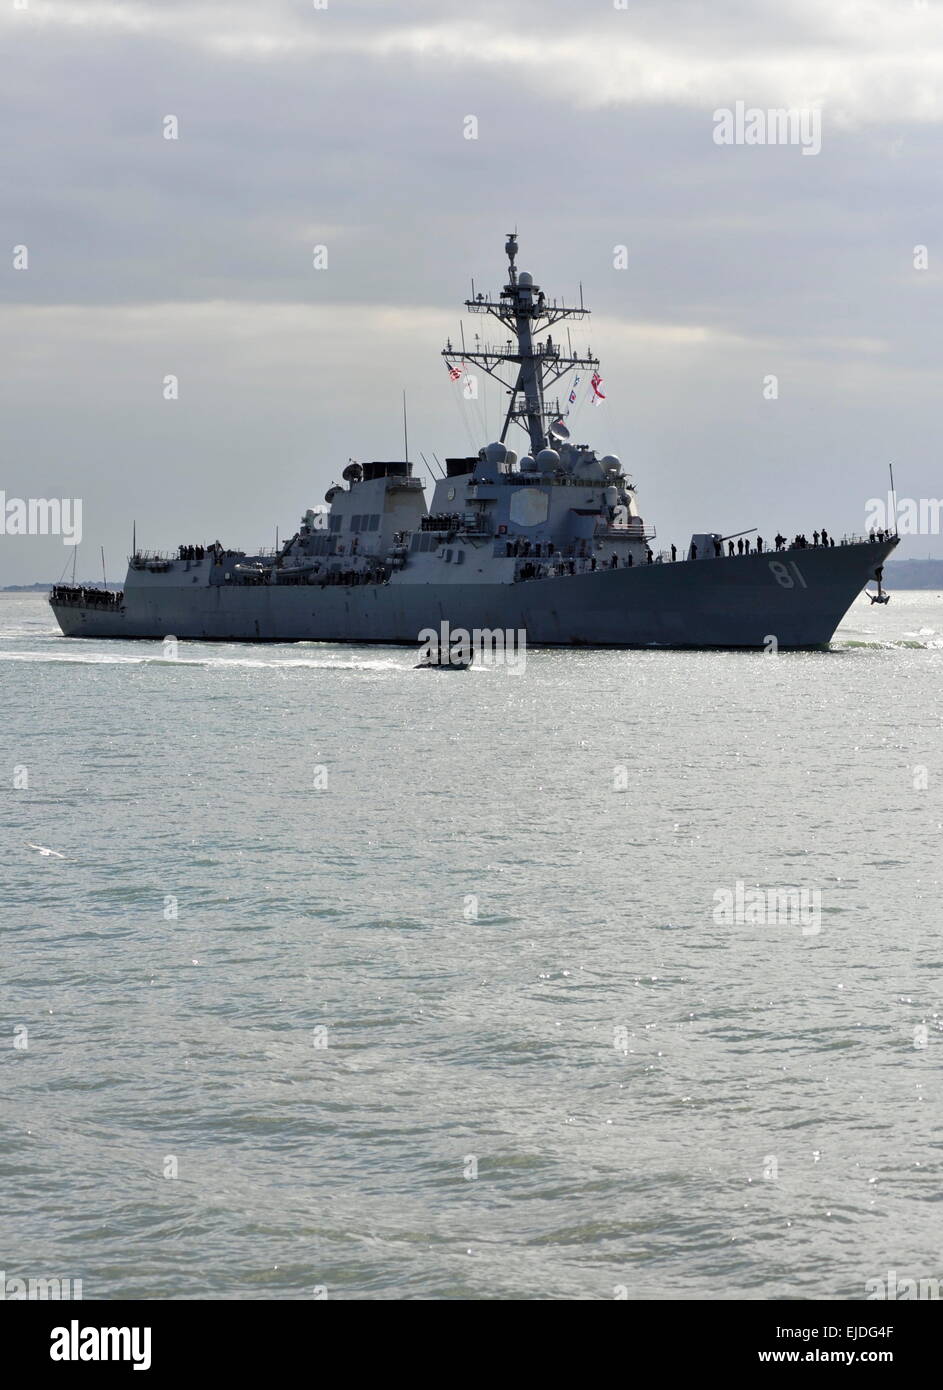 AJAXNETPHOTO. 22ND MARCH, 2015. PORTSMOUTH, ENGLAND. - U.S. DESTROYER ARRIVAL - USS WINSTON CHURCHILL (DDG-81) INWARD BOUND FOR FIVE DAY R&R VISIT. SHIP IS CURRENTLY U.S. MEDITERRANEAN CARRIER ESCORT.   PHOTO:TONY HOLLAND/AJAX REF:DTH152203 37304 Stock Photo